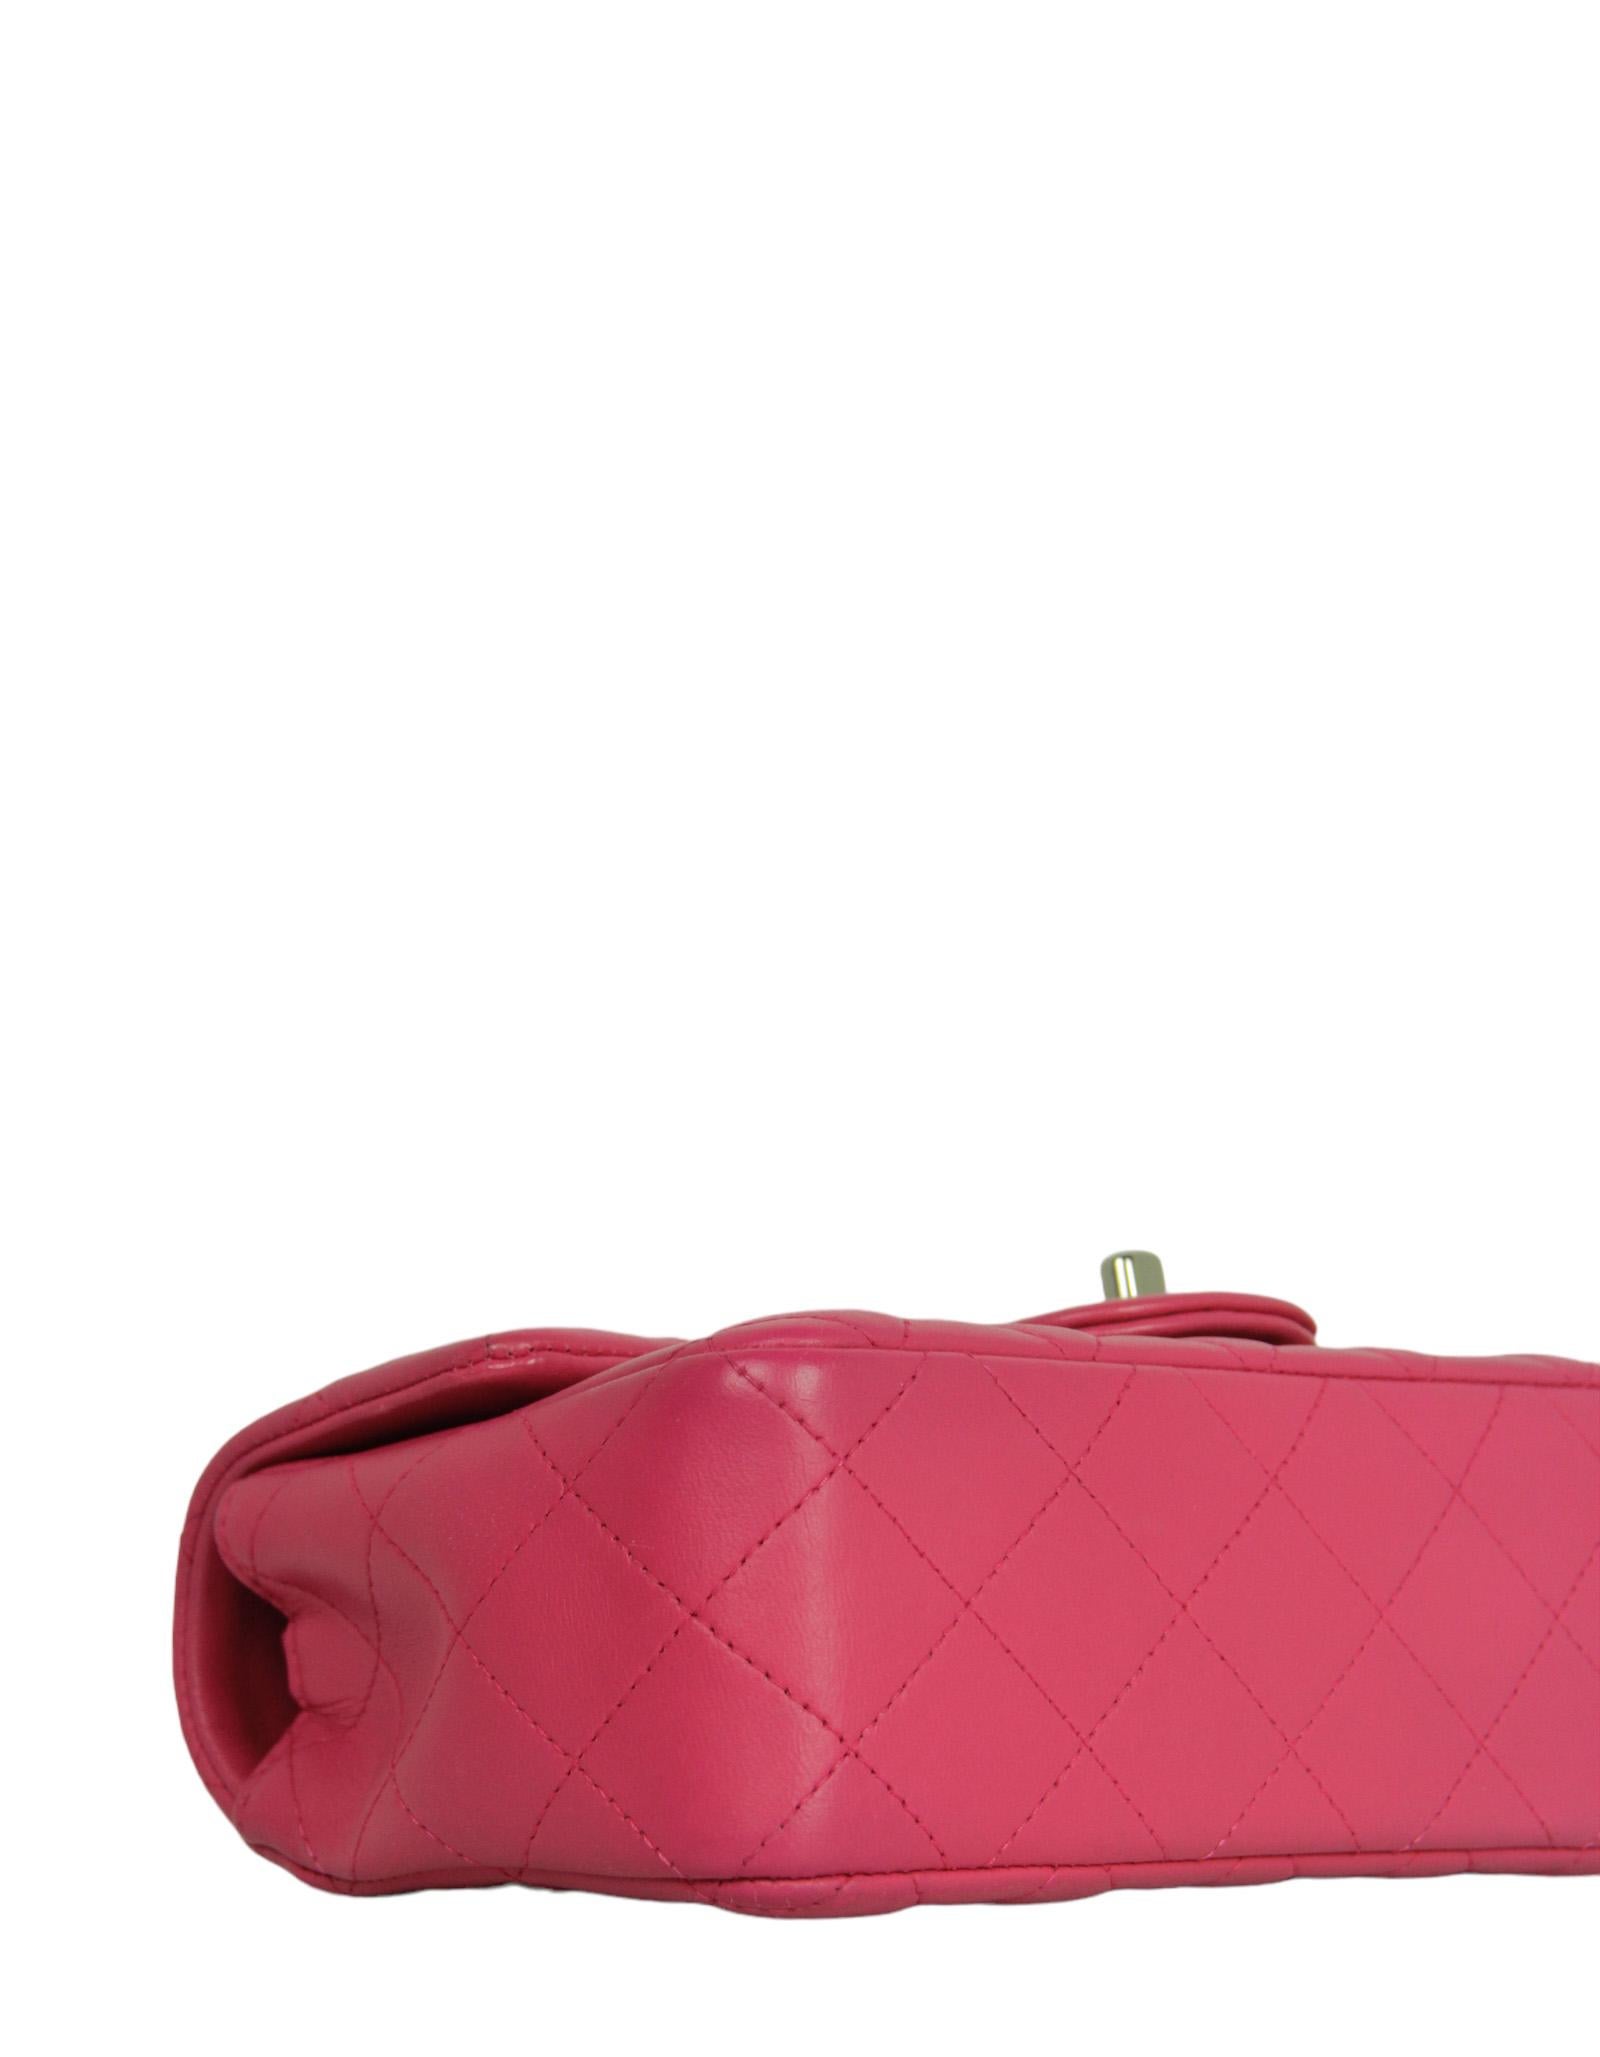 Chanel Pink Lambskin Leather Quilted Rectangular Mini Flap Bag For Sale 1